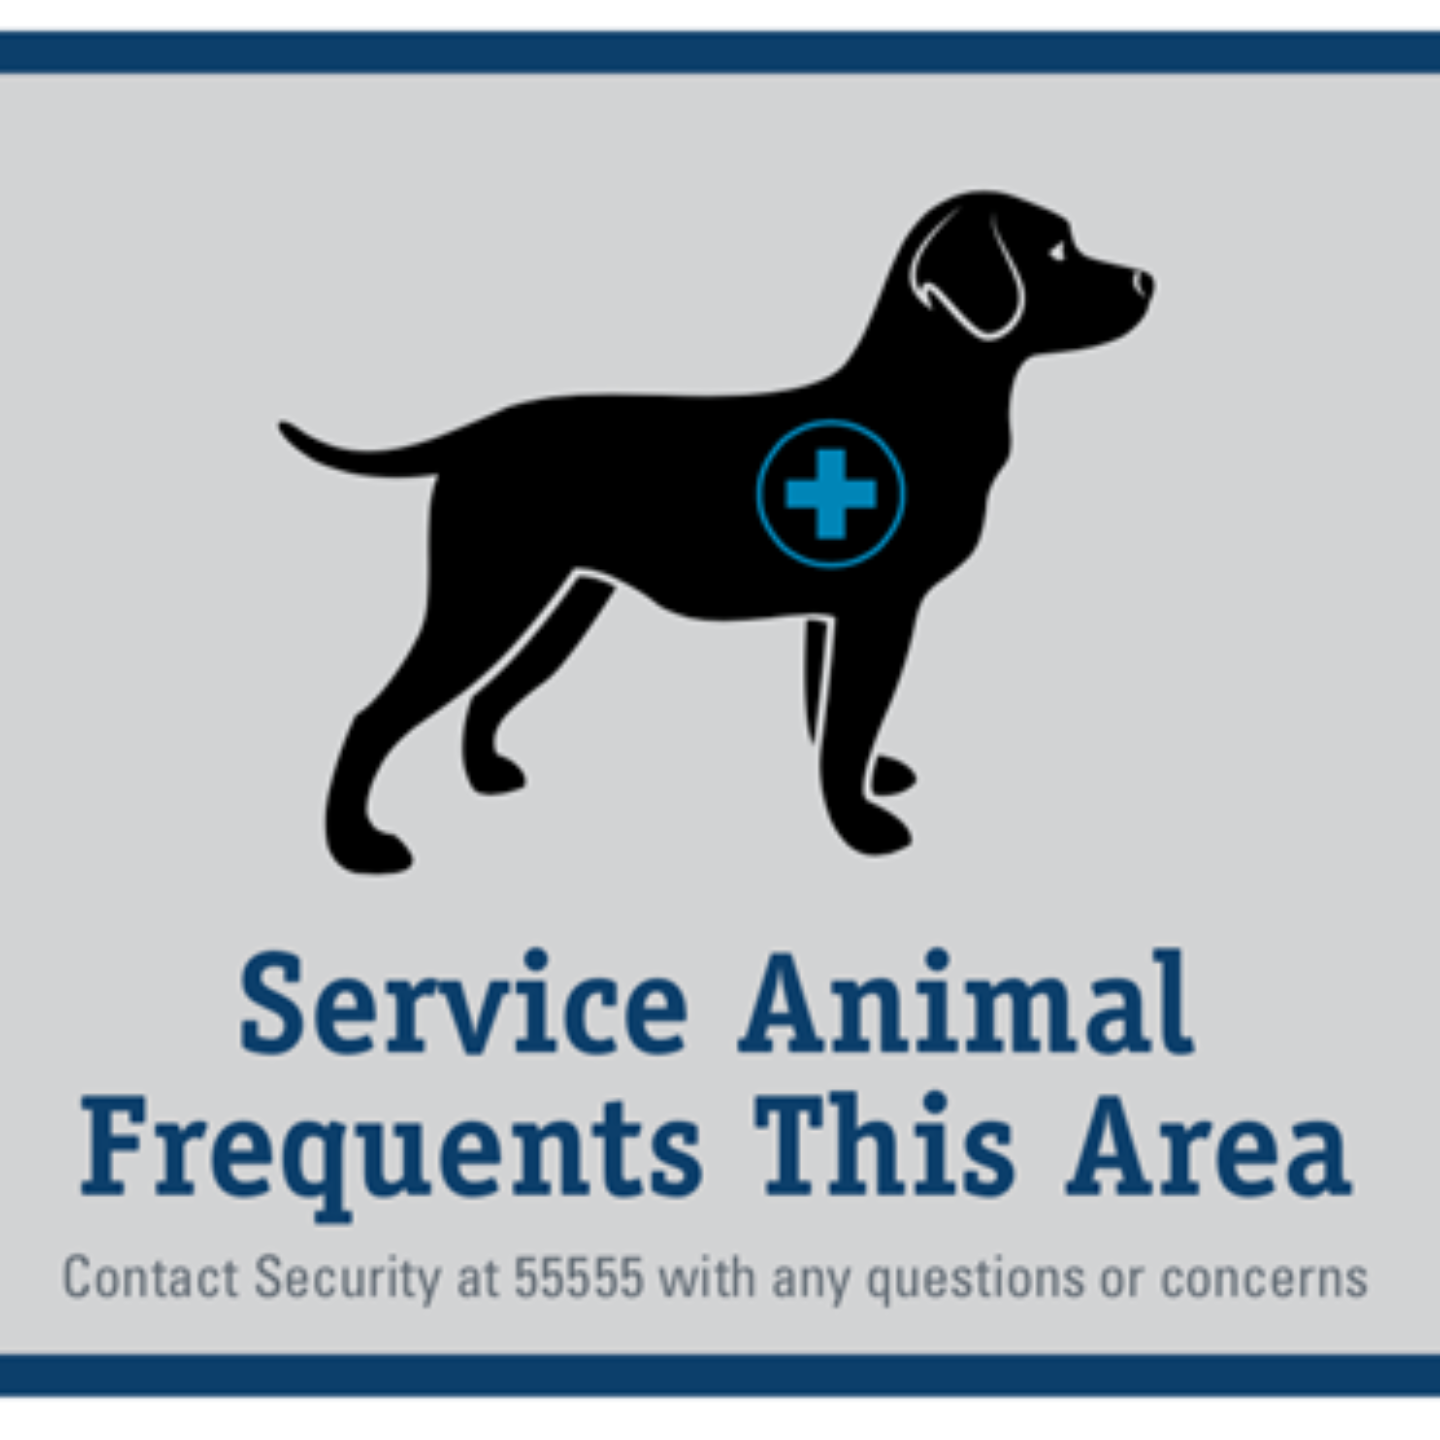 12x8 inch wall sign picturing a service animal and text reading "Service Animal Frequents This Area. Contact Security with any questions or concerns."